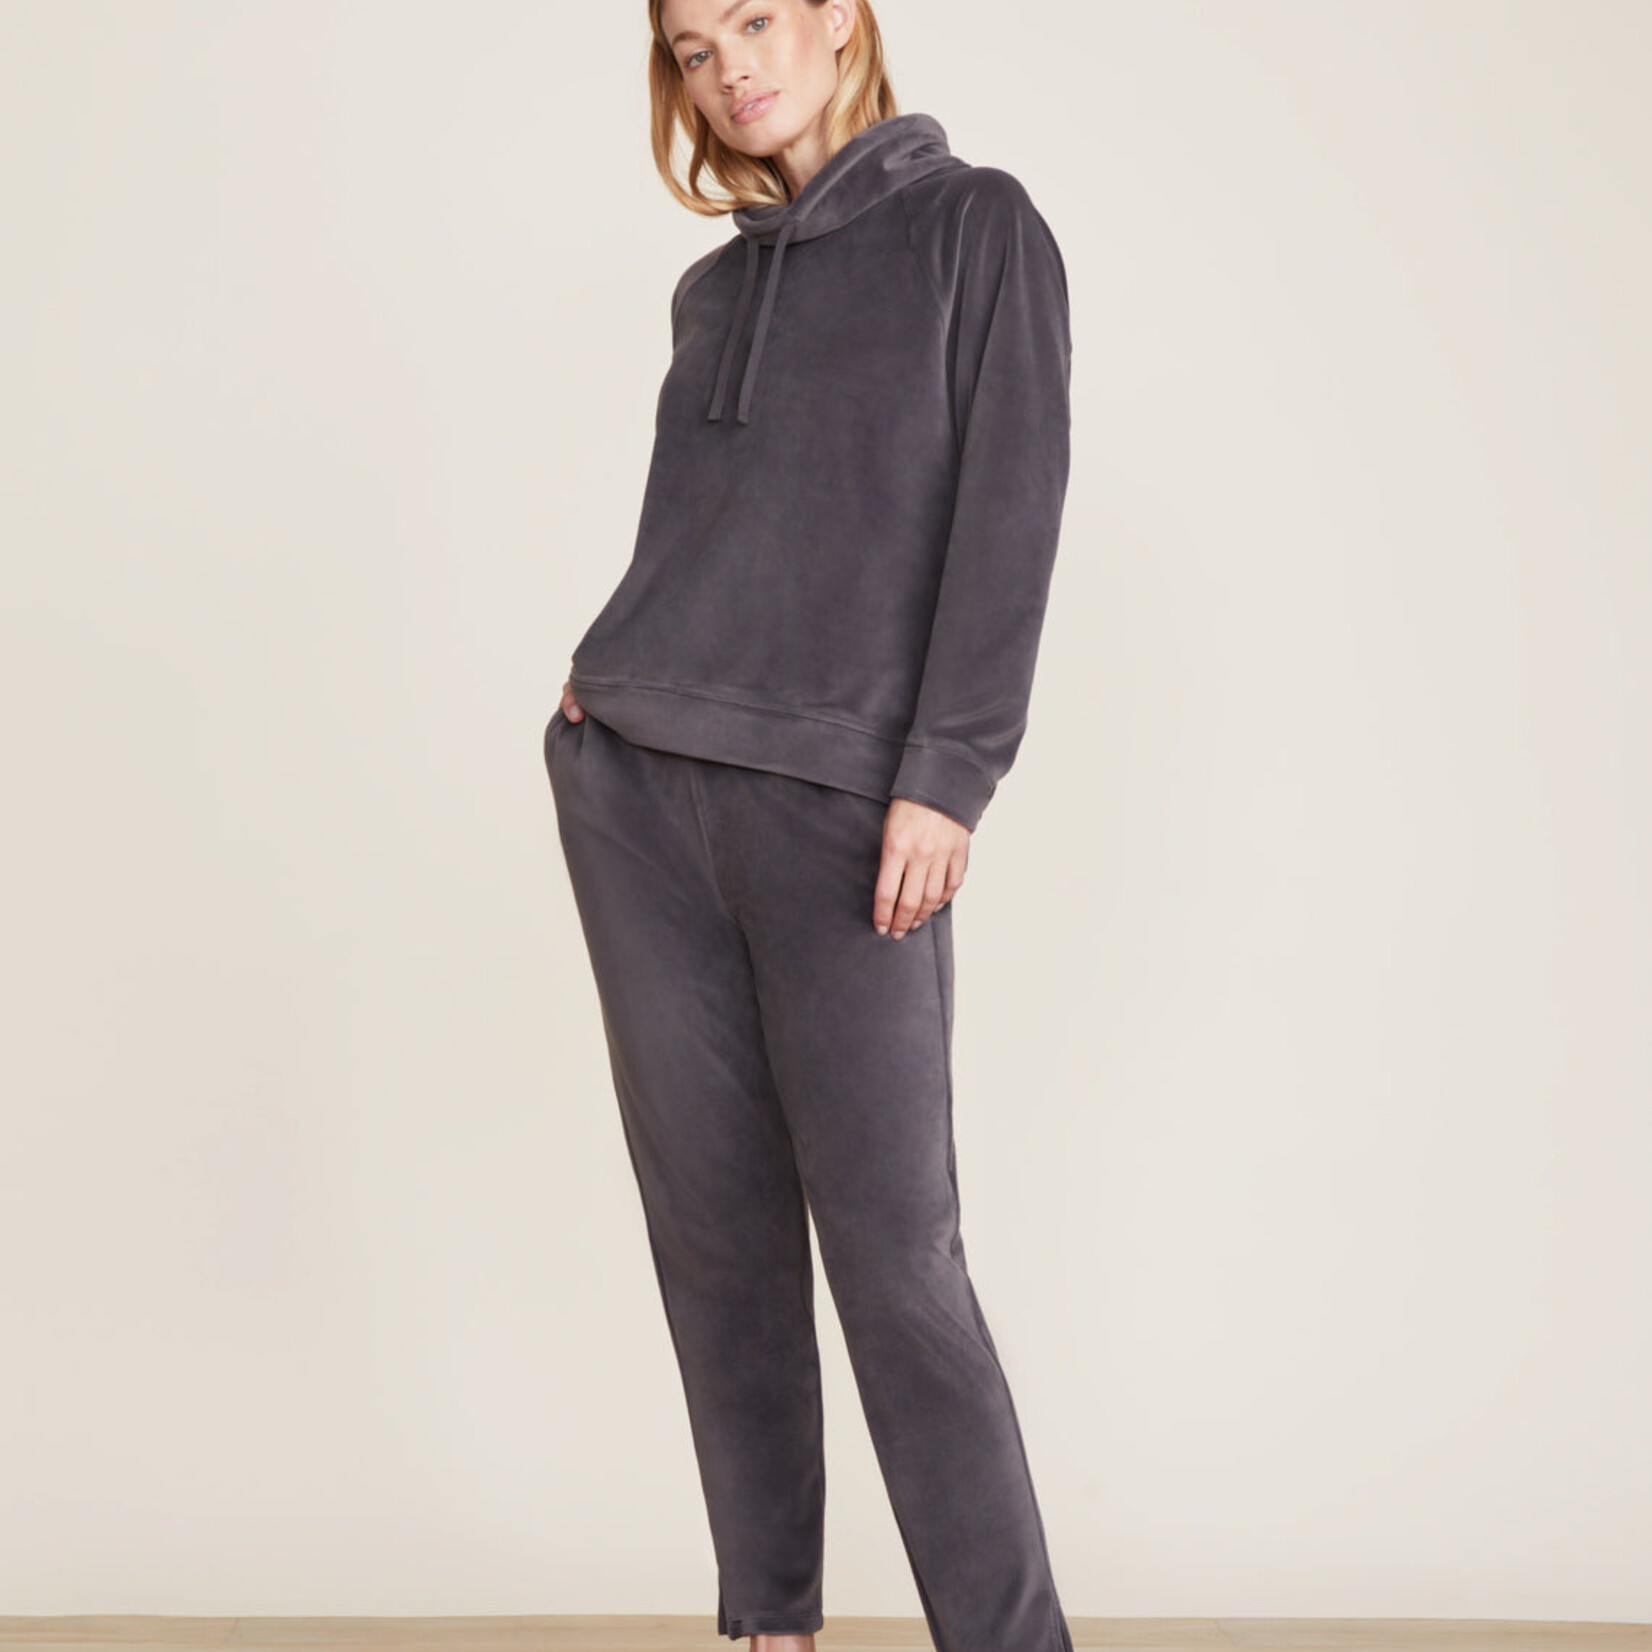 Barefoot Dreams Barefoot Dreams - Luxechic Funnel Neck Pullover - Carbon